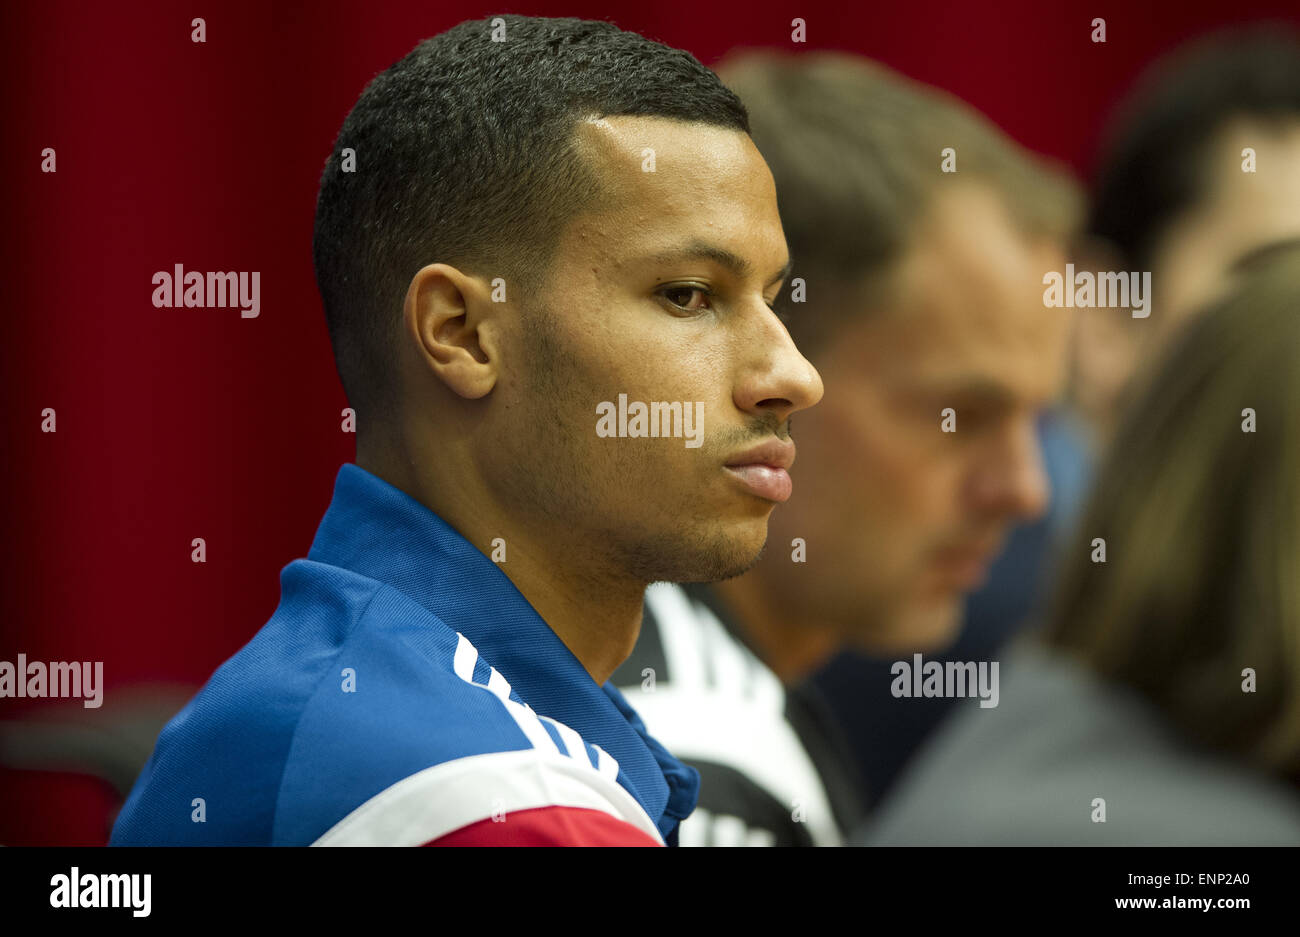 AFC Ajax head coach Frank de Boer and AFC Ajax defender Ricardo van Rhijn attend a press conference at the Amsterdam ArenA ahead of the UEFA Champions League Group match against Barcelona  Featuring: Ricardo van Rhijn Where: Amsterdam, Netherlands When: 04 Nov 2014 Stock Photo